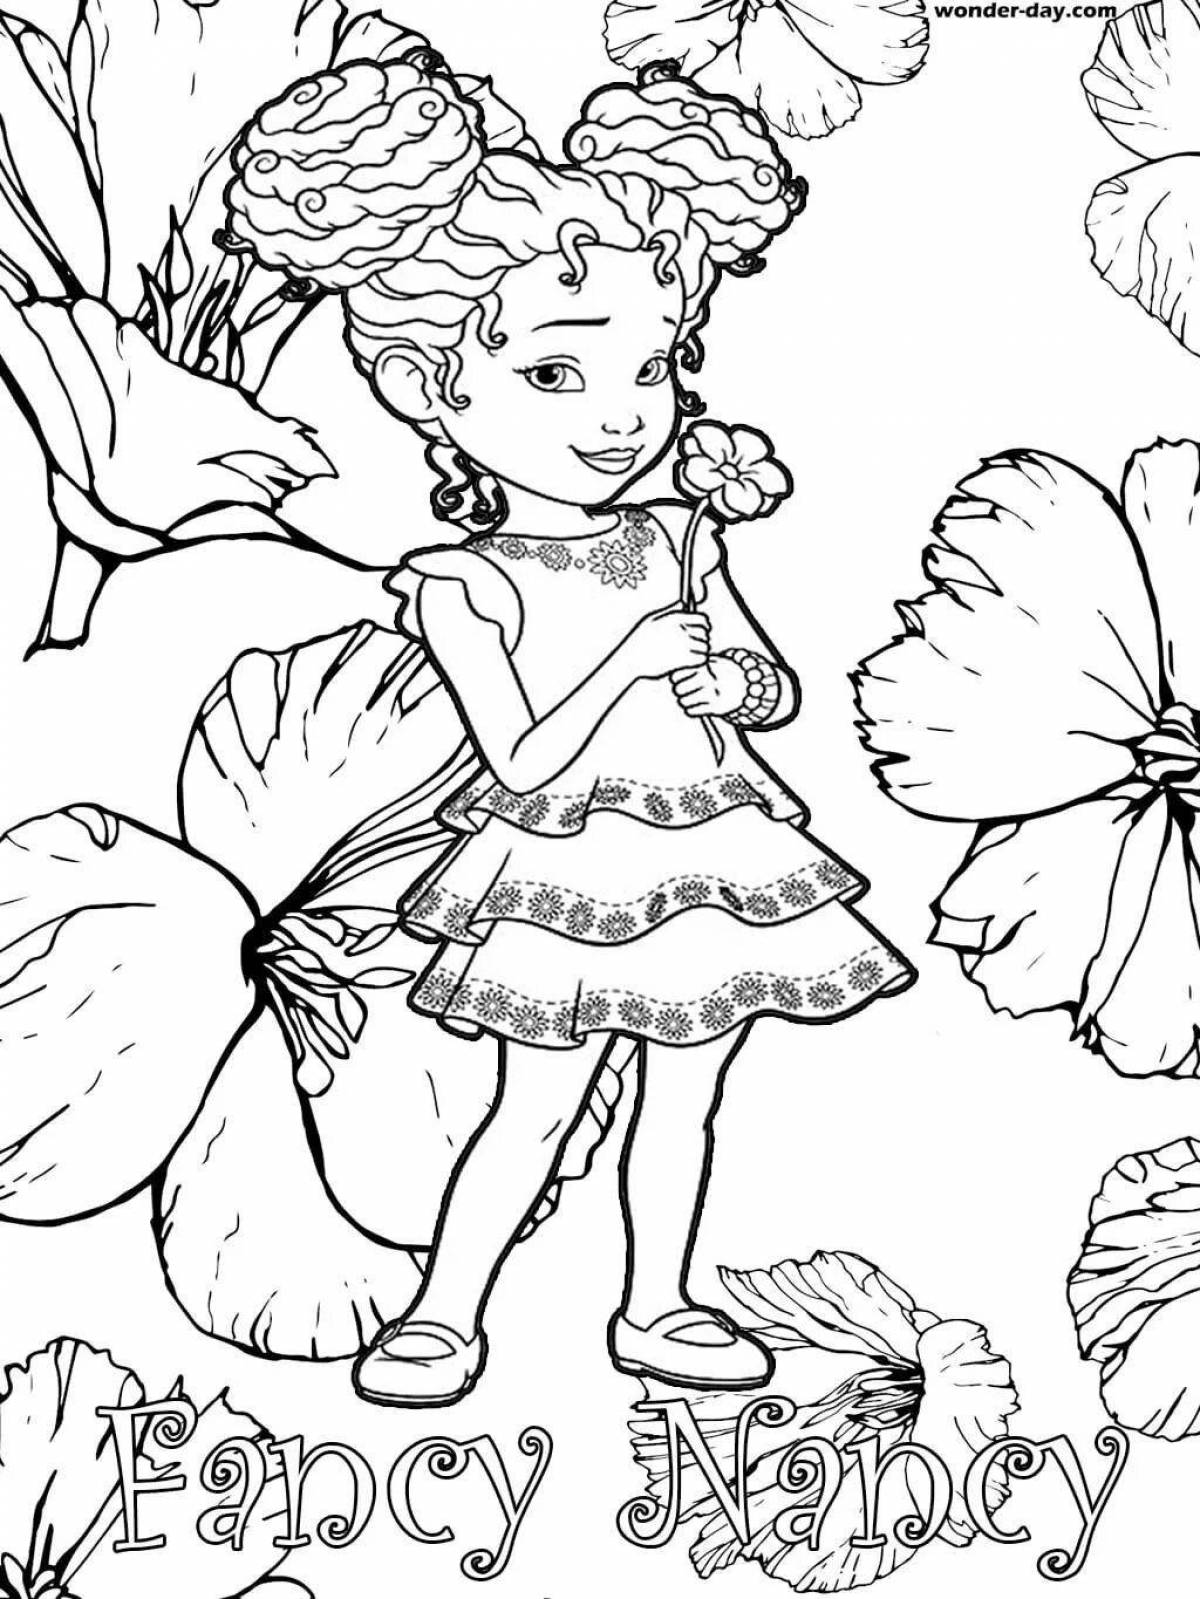 Coloring page living wonderful day